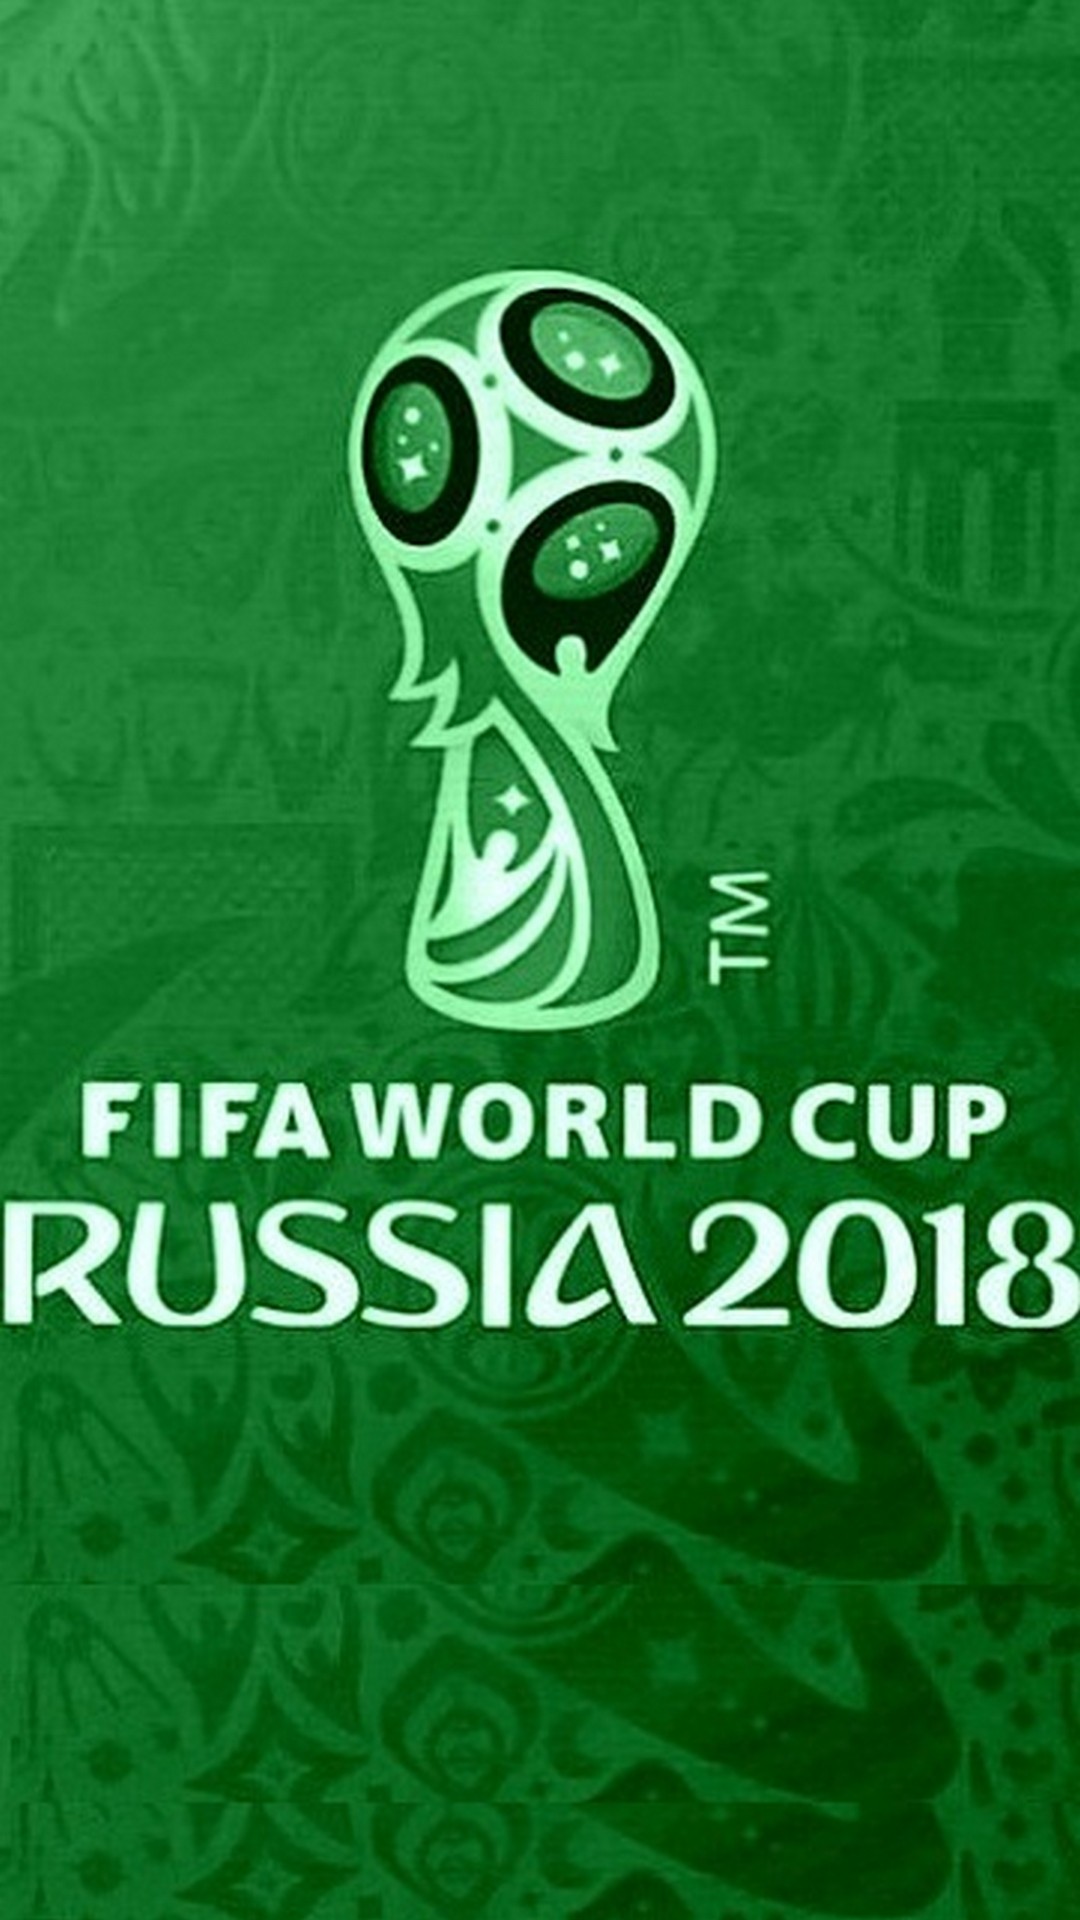 Android Wallpaper 2018 World Cup High Resolution 1080X1920